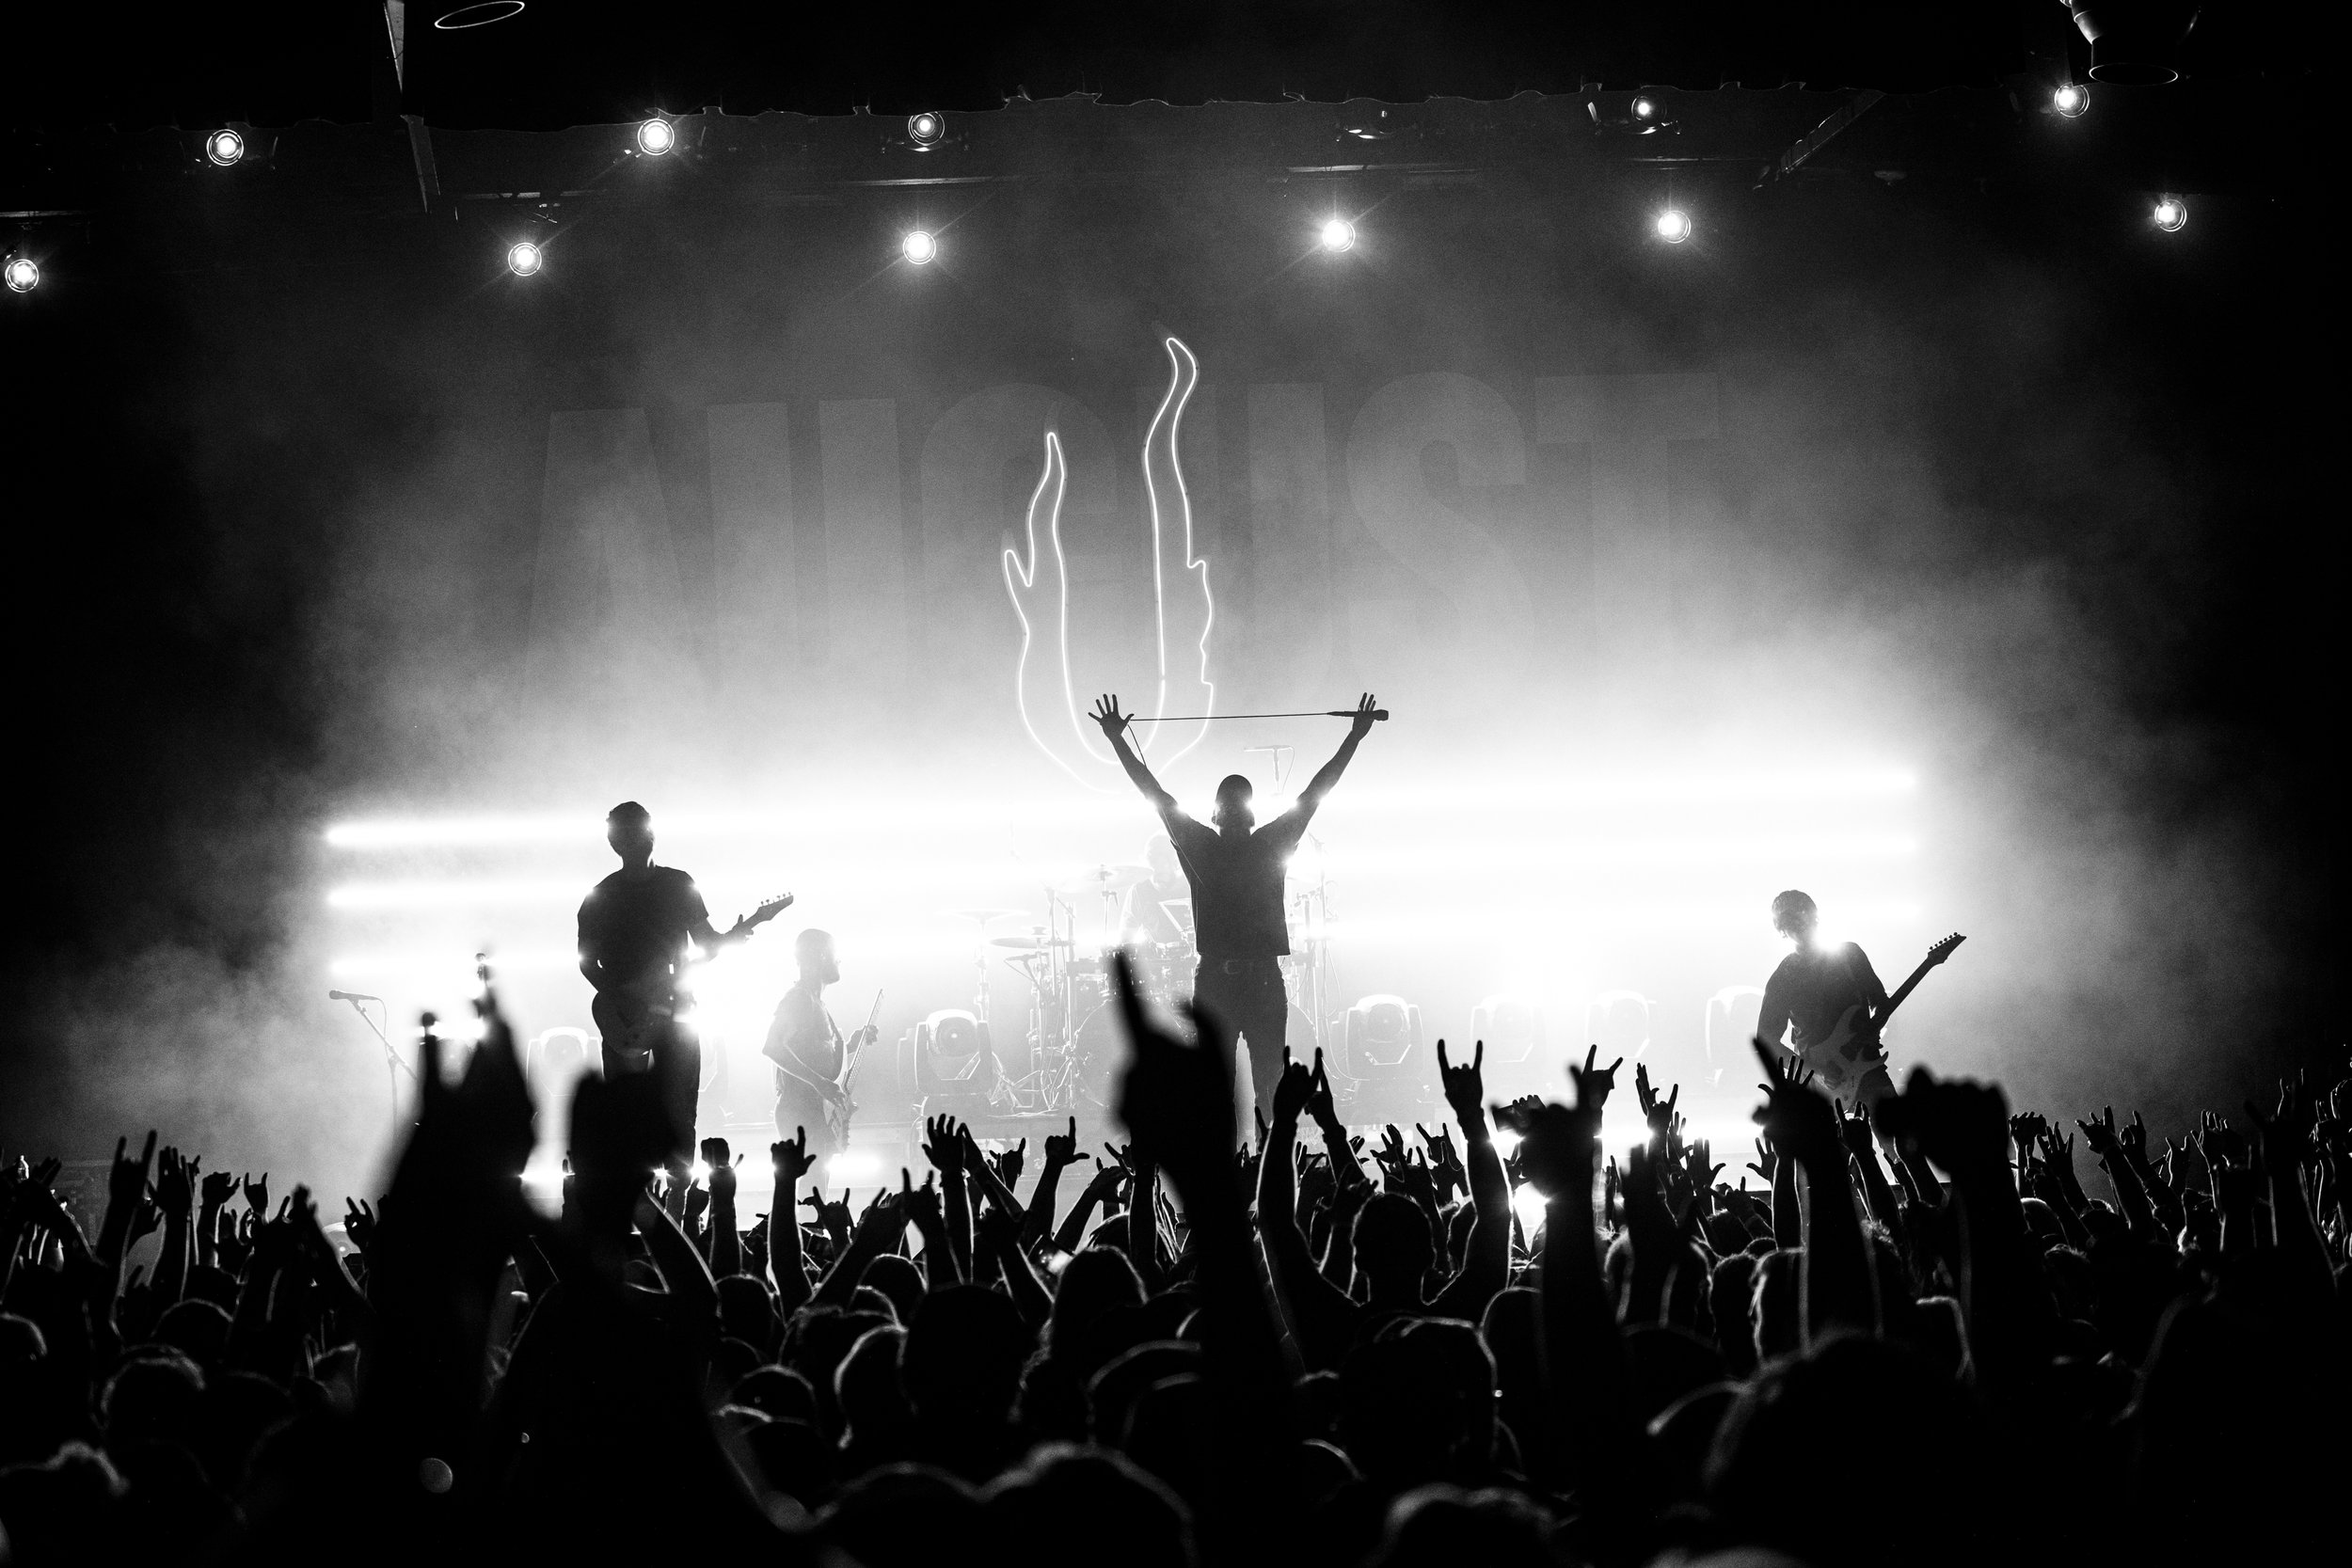 August Burns Red, The Devil Wears Prada -  20 YEAR ANNIVERSARY TOUR - Fillmore Auditorium - Denver, Colorado - Friday, March 10, 2023 - PHOTO BY Mowgli Miles of Interracial Friends - PHOTO BY Mowgli Miles of Interracial Friends-131.JPG